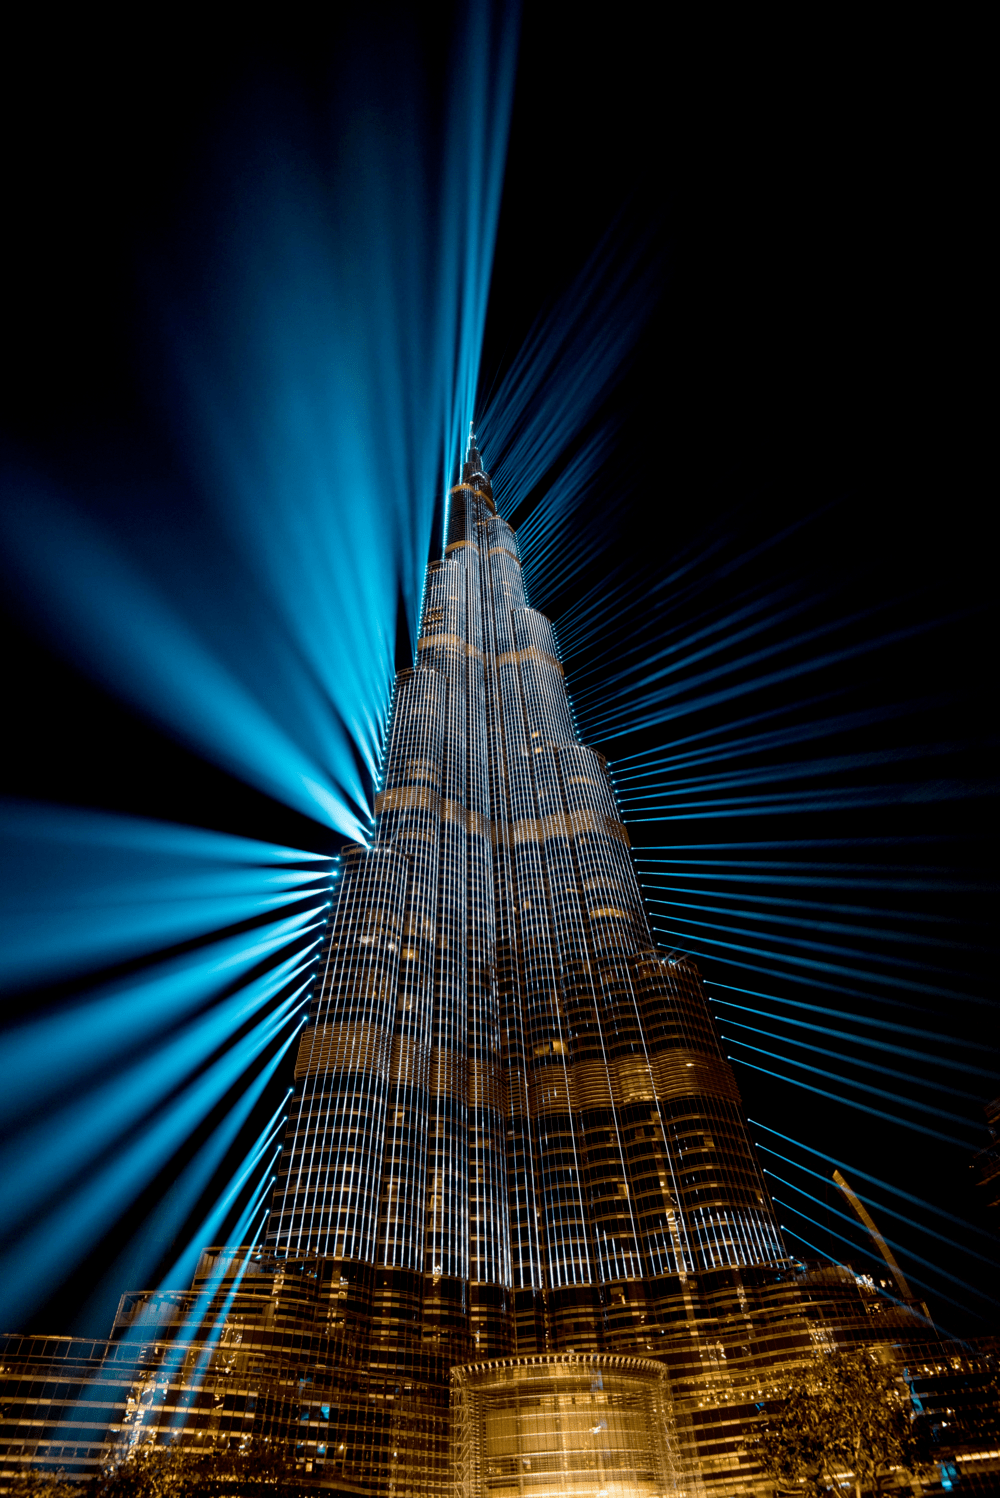 1. Burj Khalifa – one of the most instagrammable places in Dubai